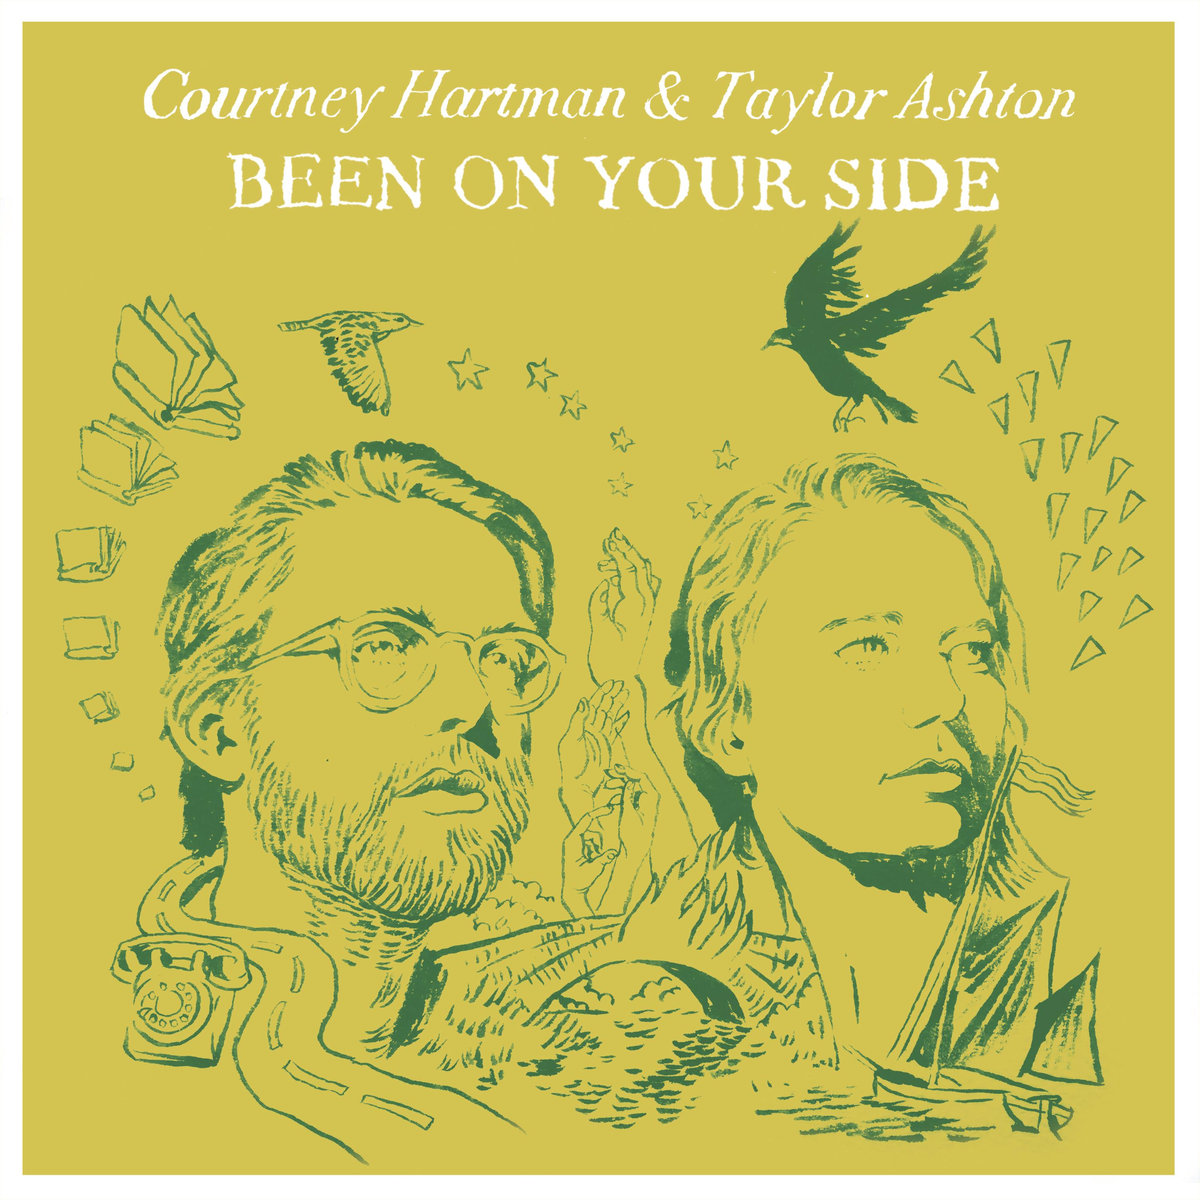 COURTNEY HARTMAN & TAYLOR ASHTON / BEEN ON YOUR SIDE